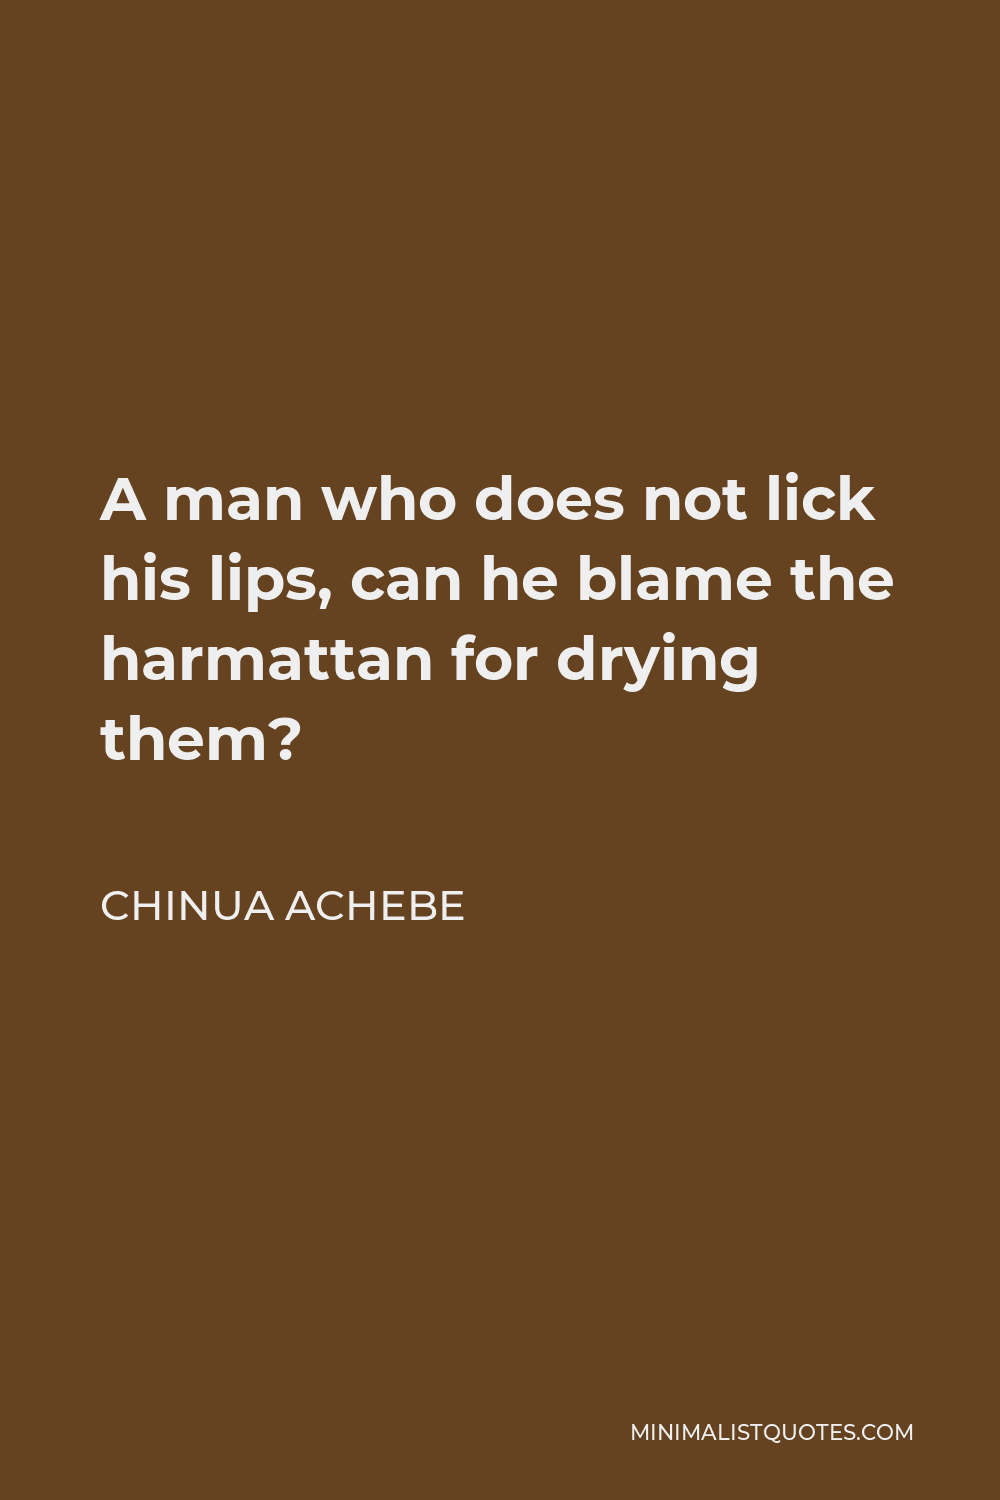 Chinua Achebe Quote - A man who does not lick his lips, can he blame the harmattan for drying them?